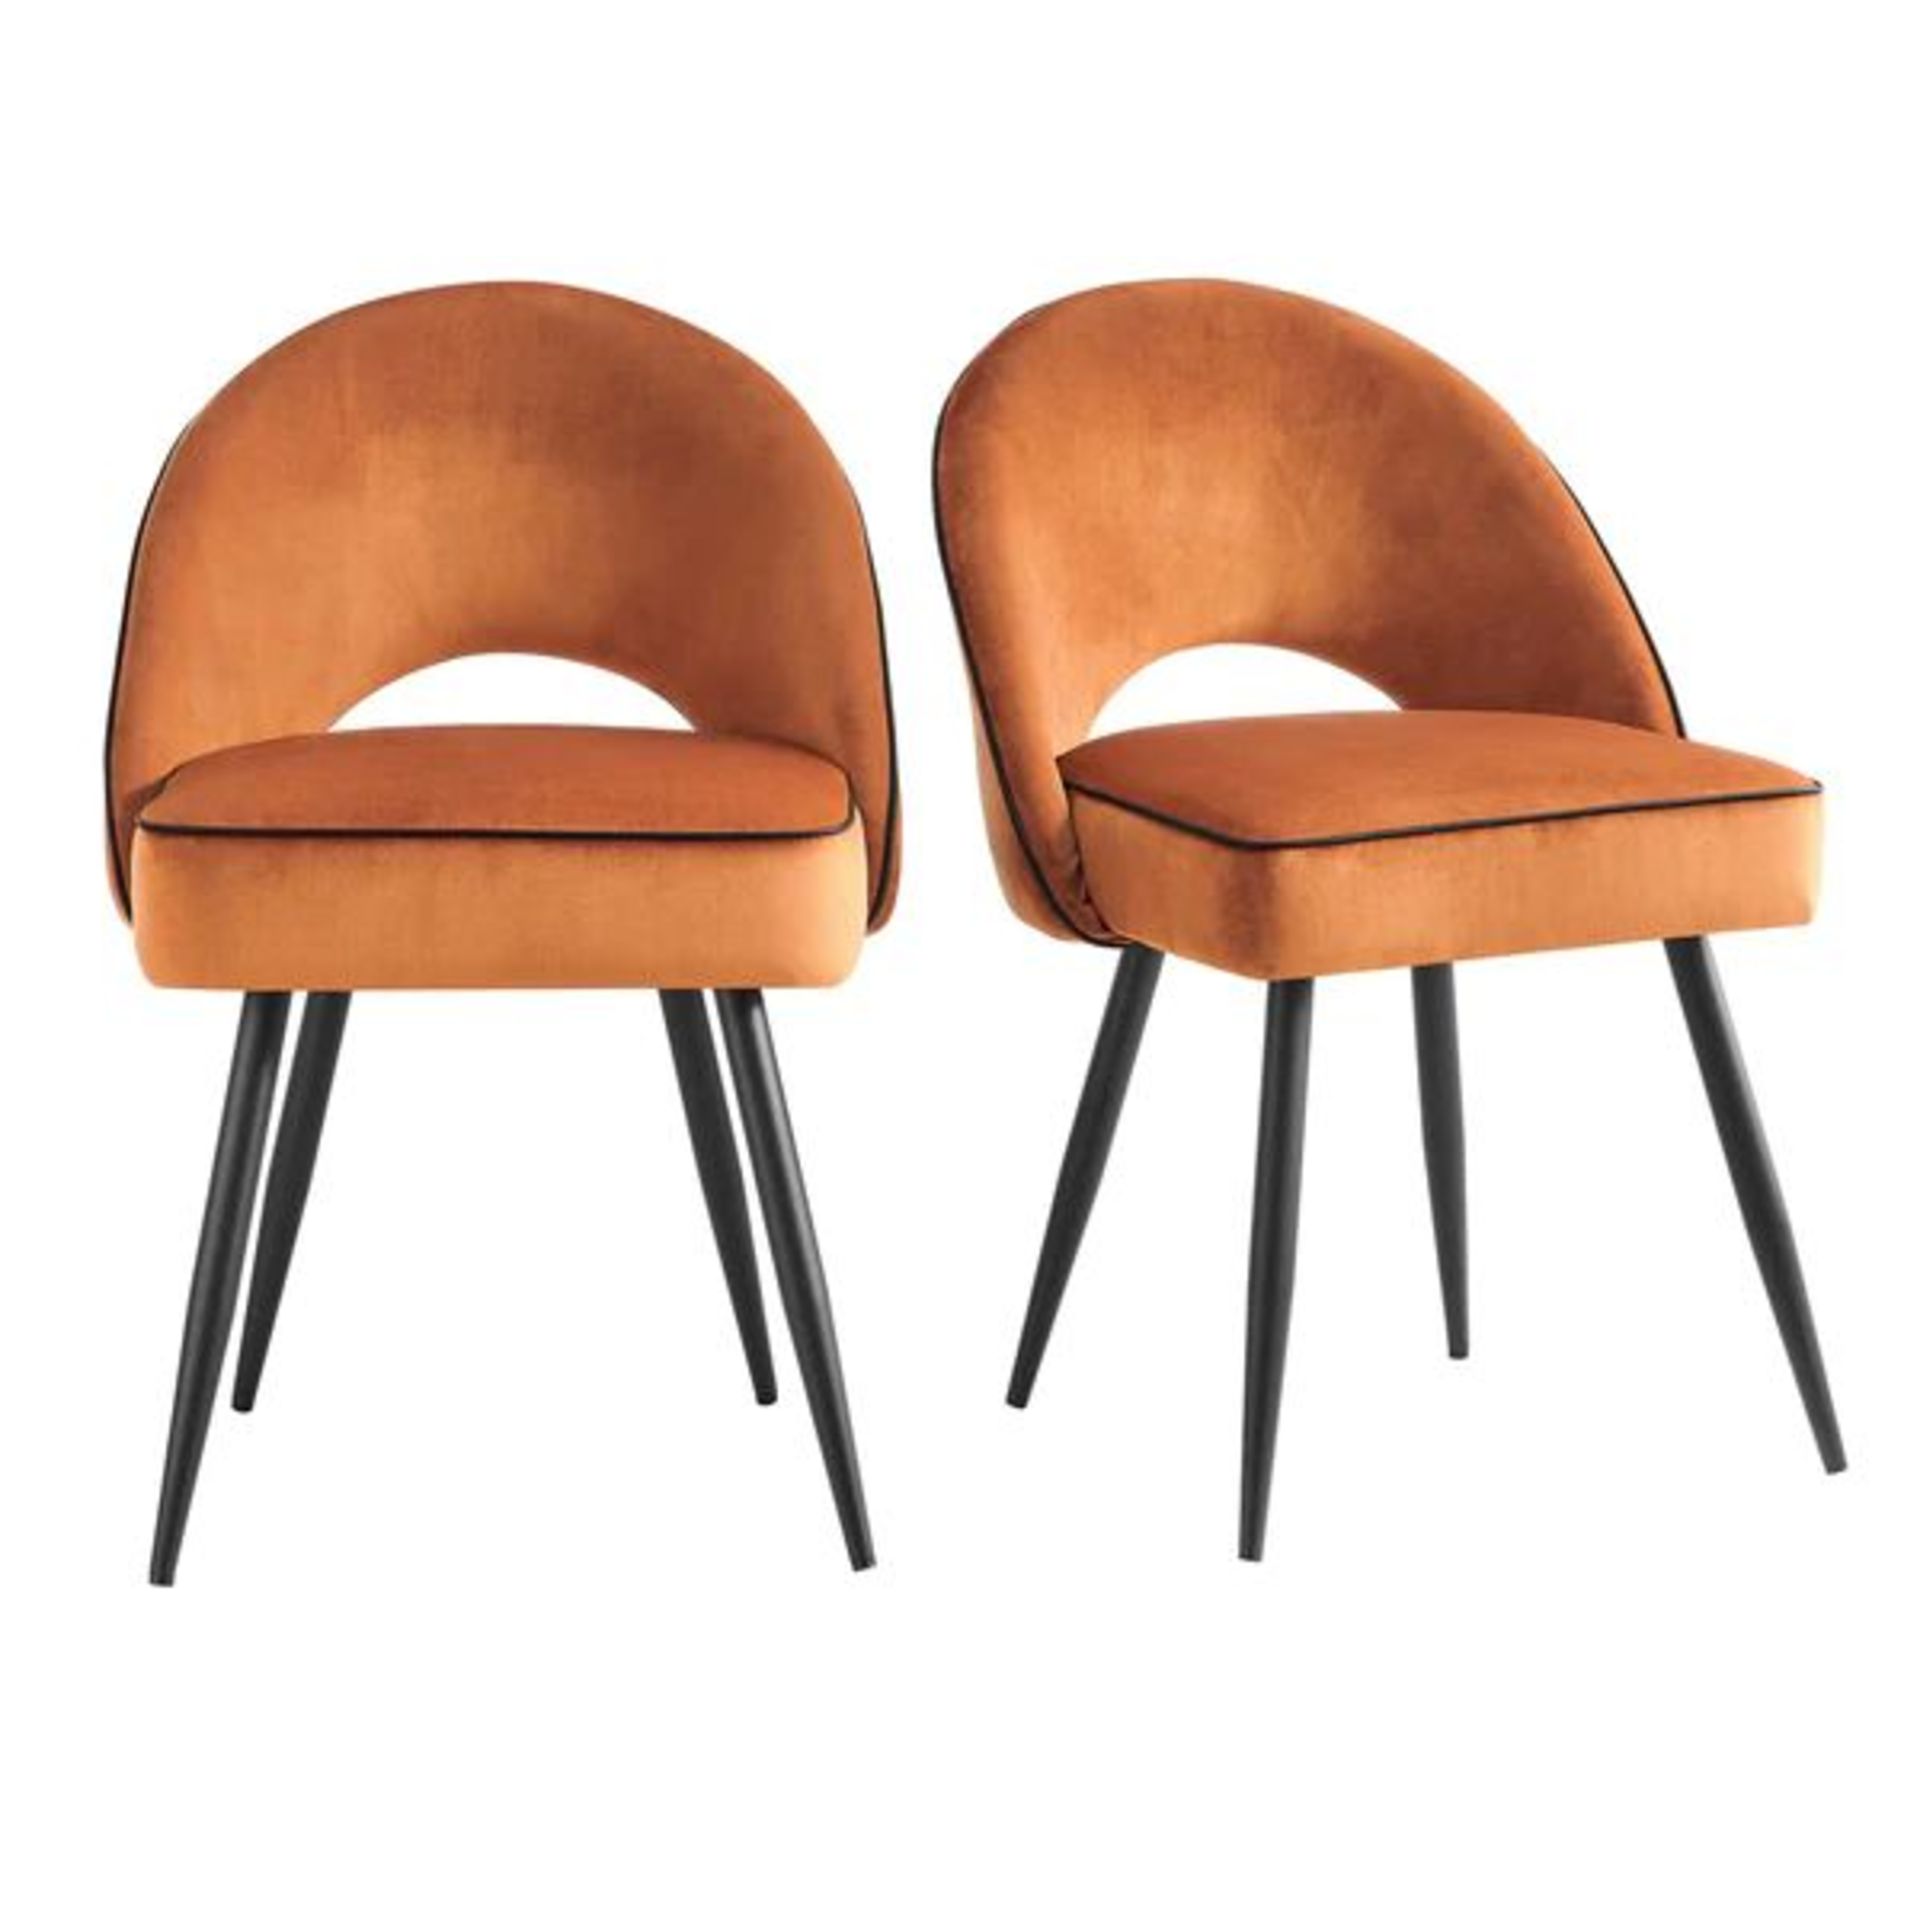 Oakley Set of 2 Orange Velvet Upholstered Dining Chairs with Contrast Piping. - ER31. RRP £279.99. - Image 2 of 2